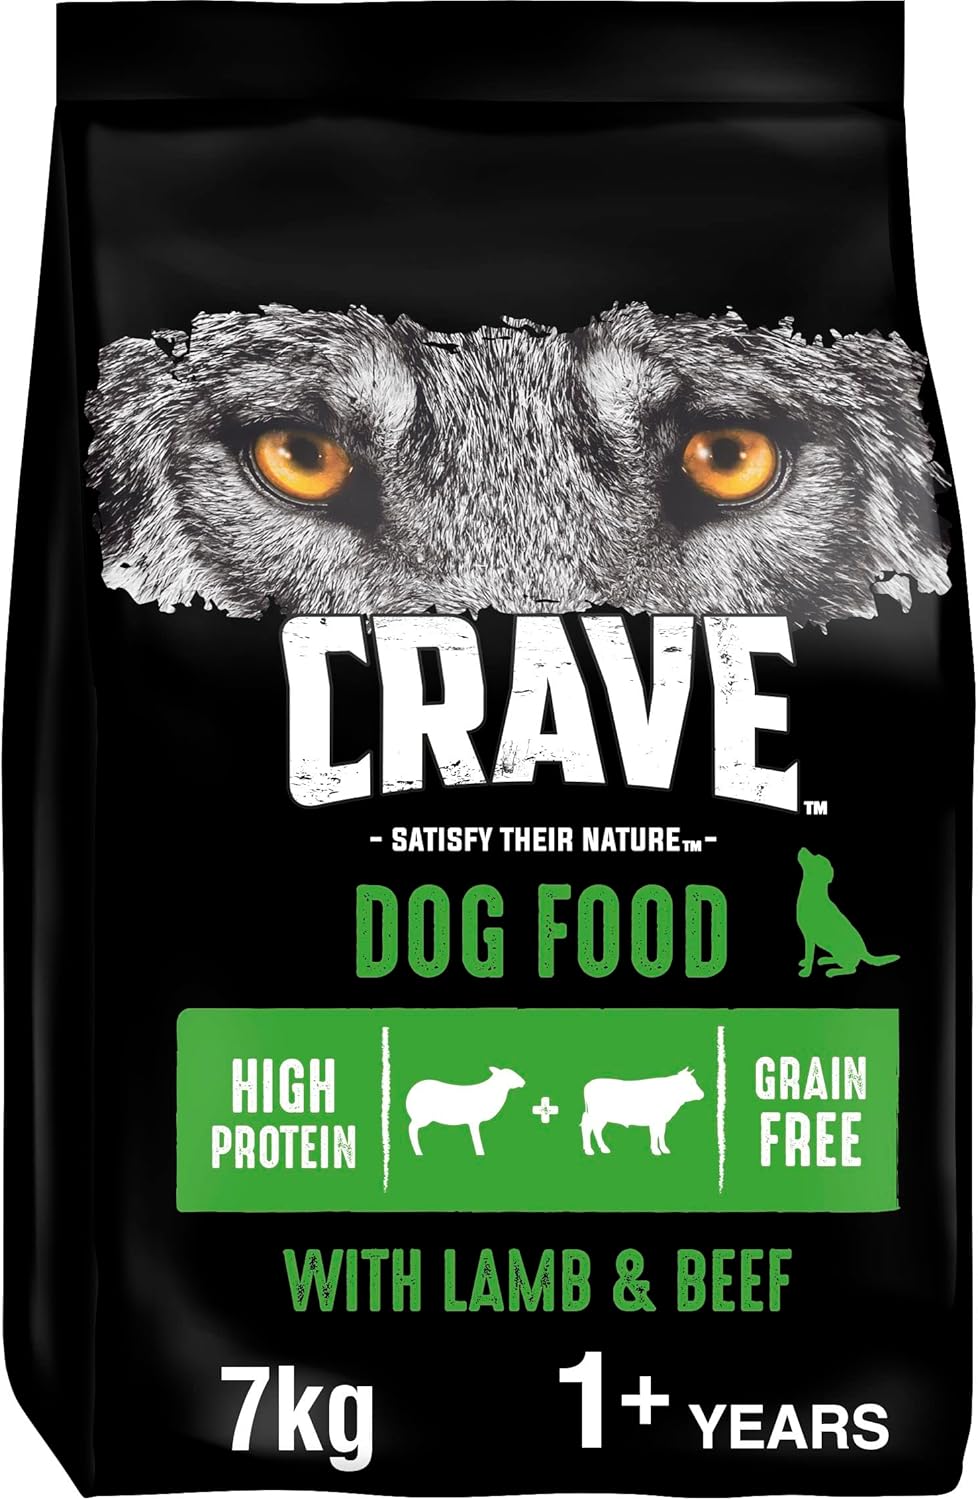 Crave Lamb & Beef 7 kg Bag, Premium Adult Dry Dog Food with high Protein, Grain-free?407892